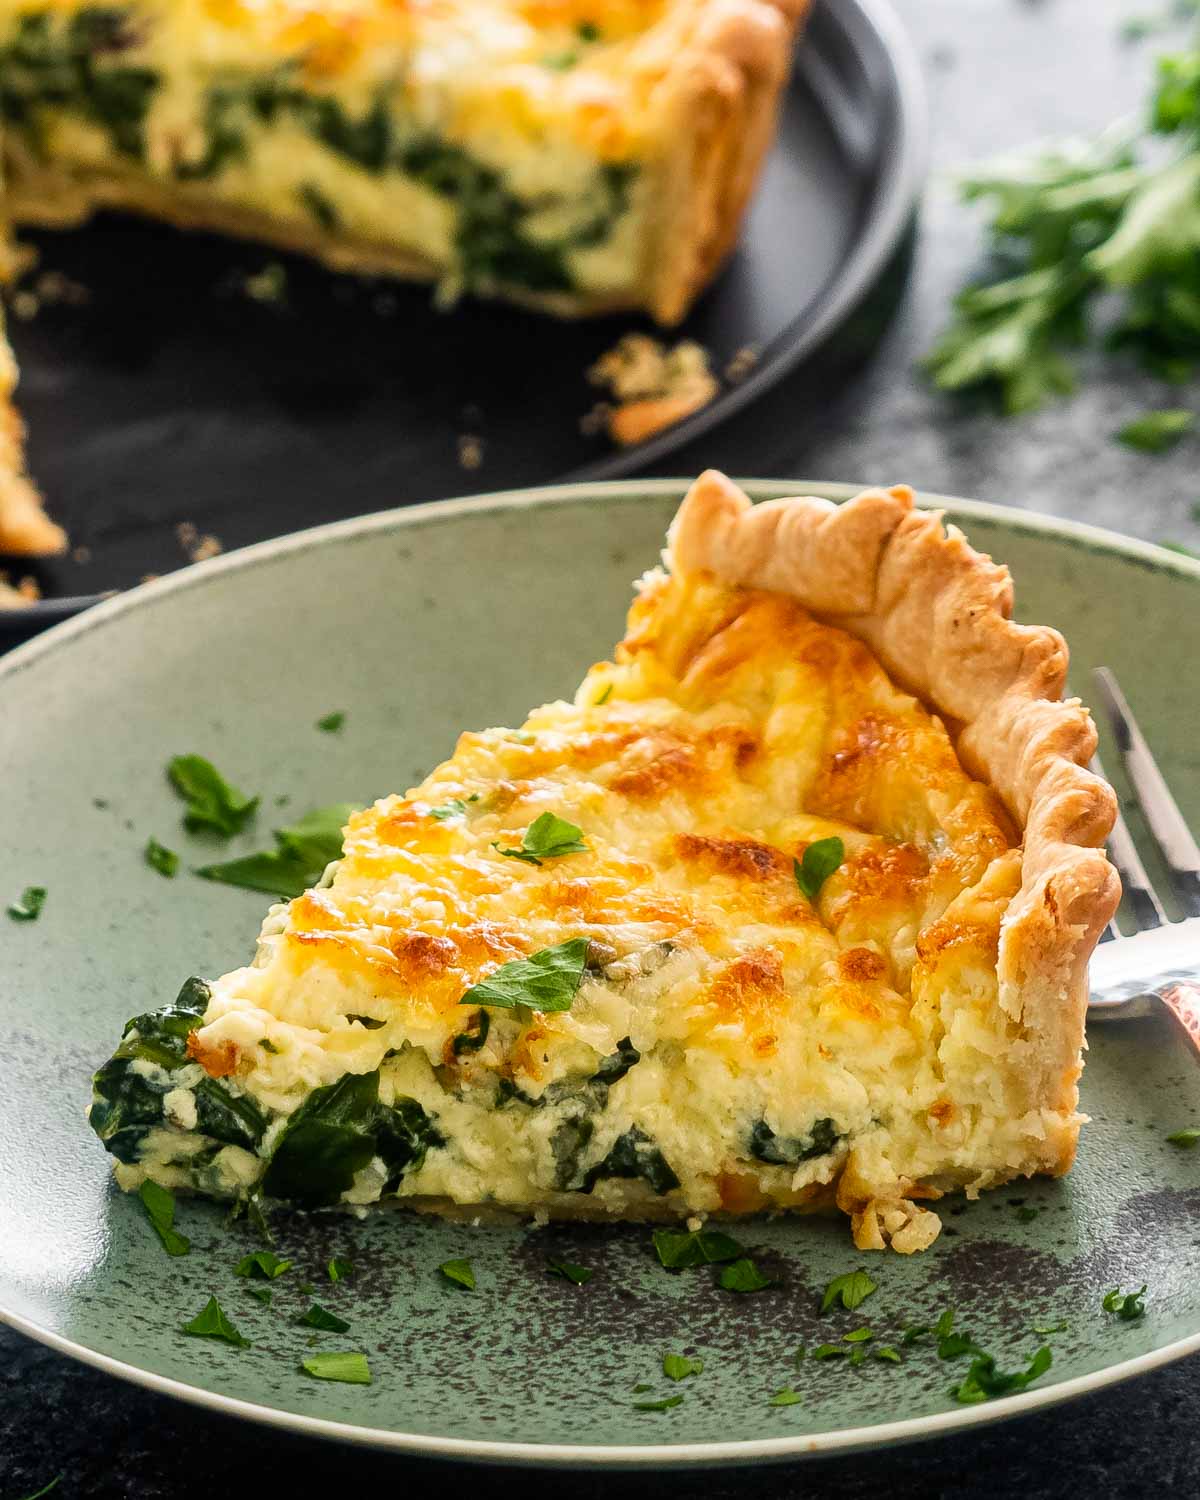 a slice of quiche florentine on a green plate.